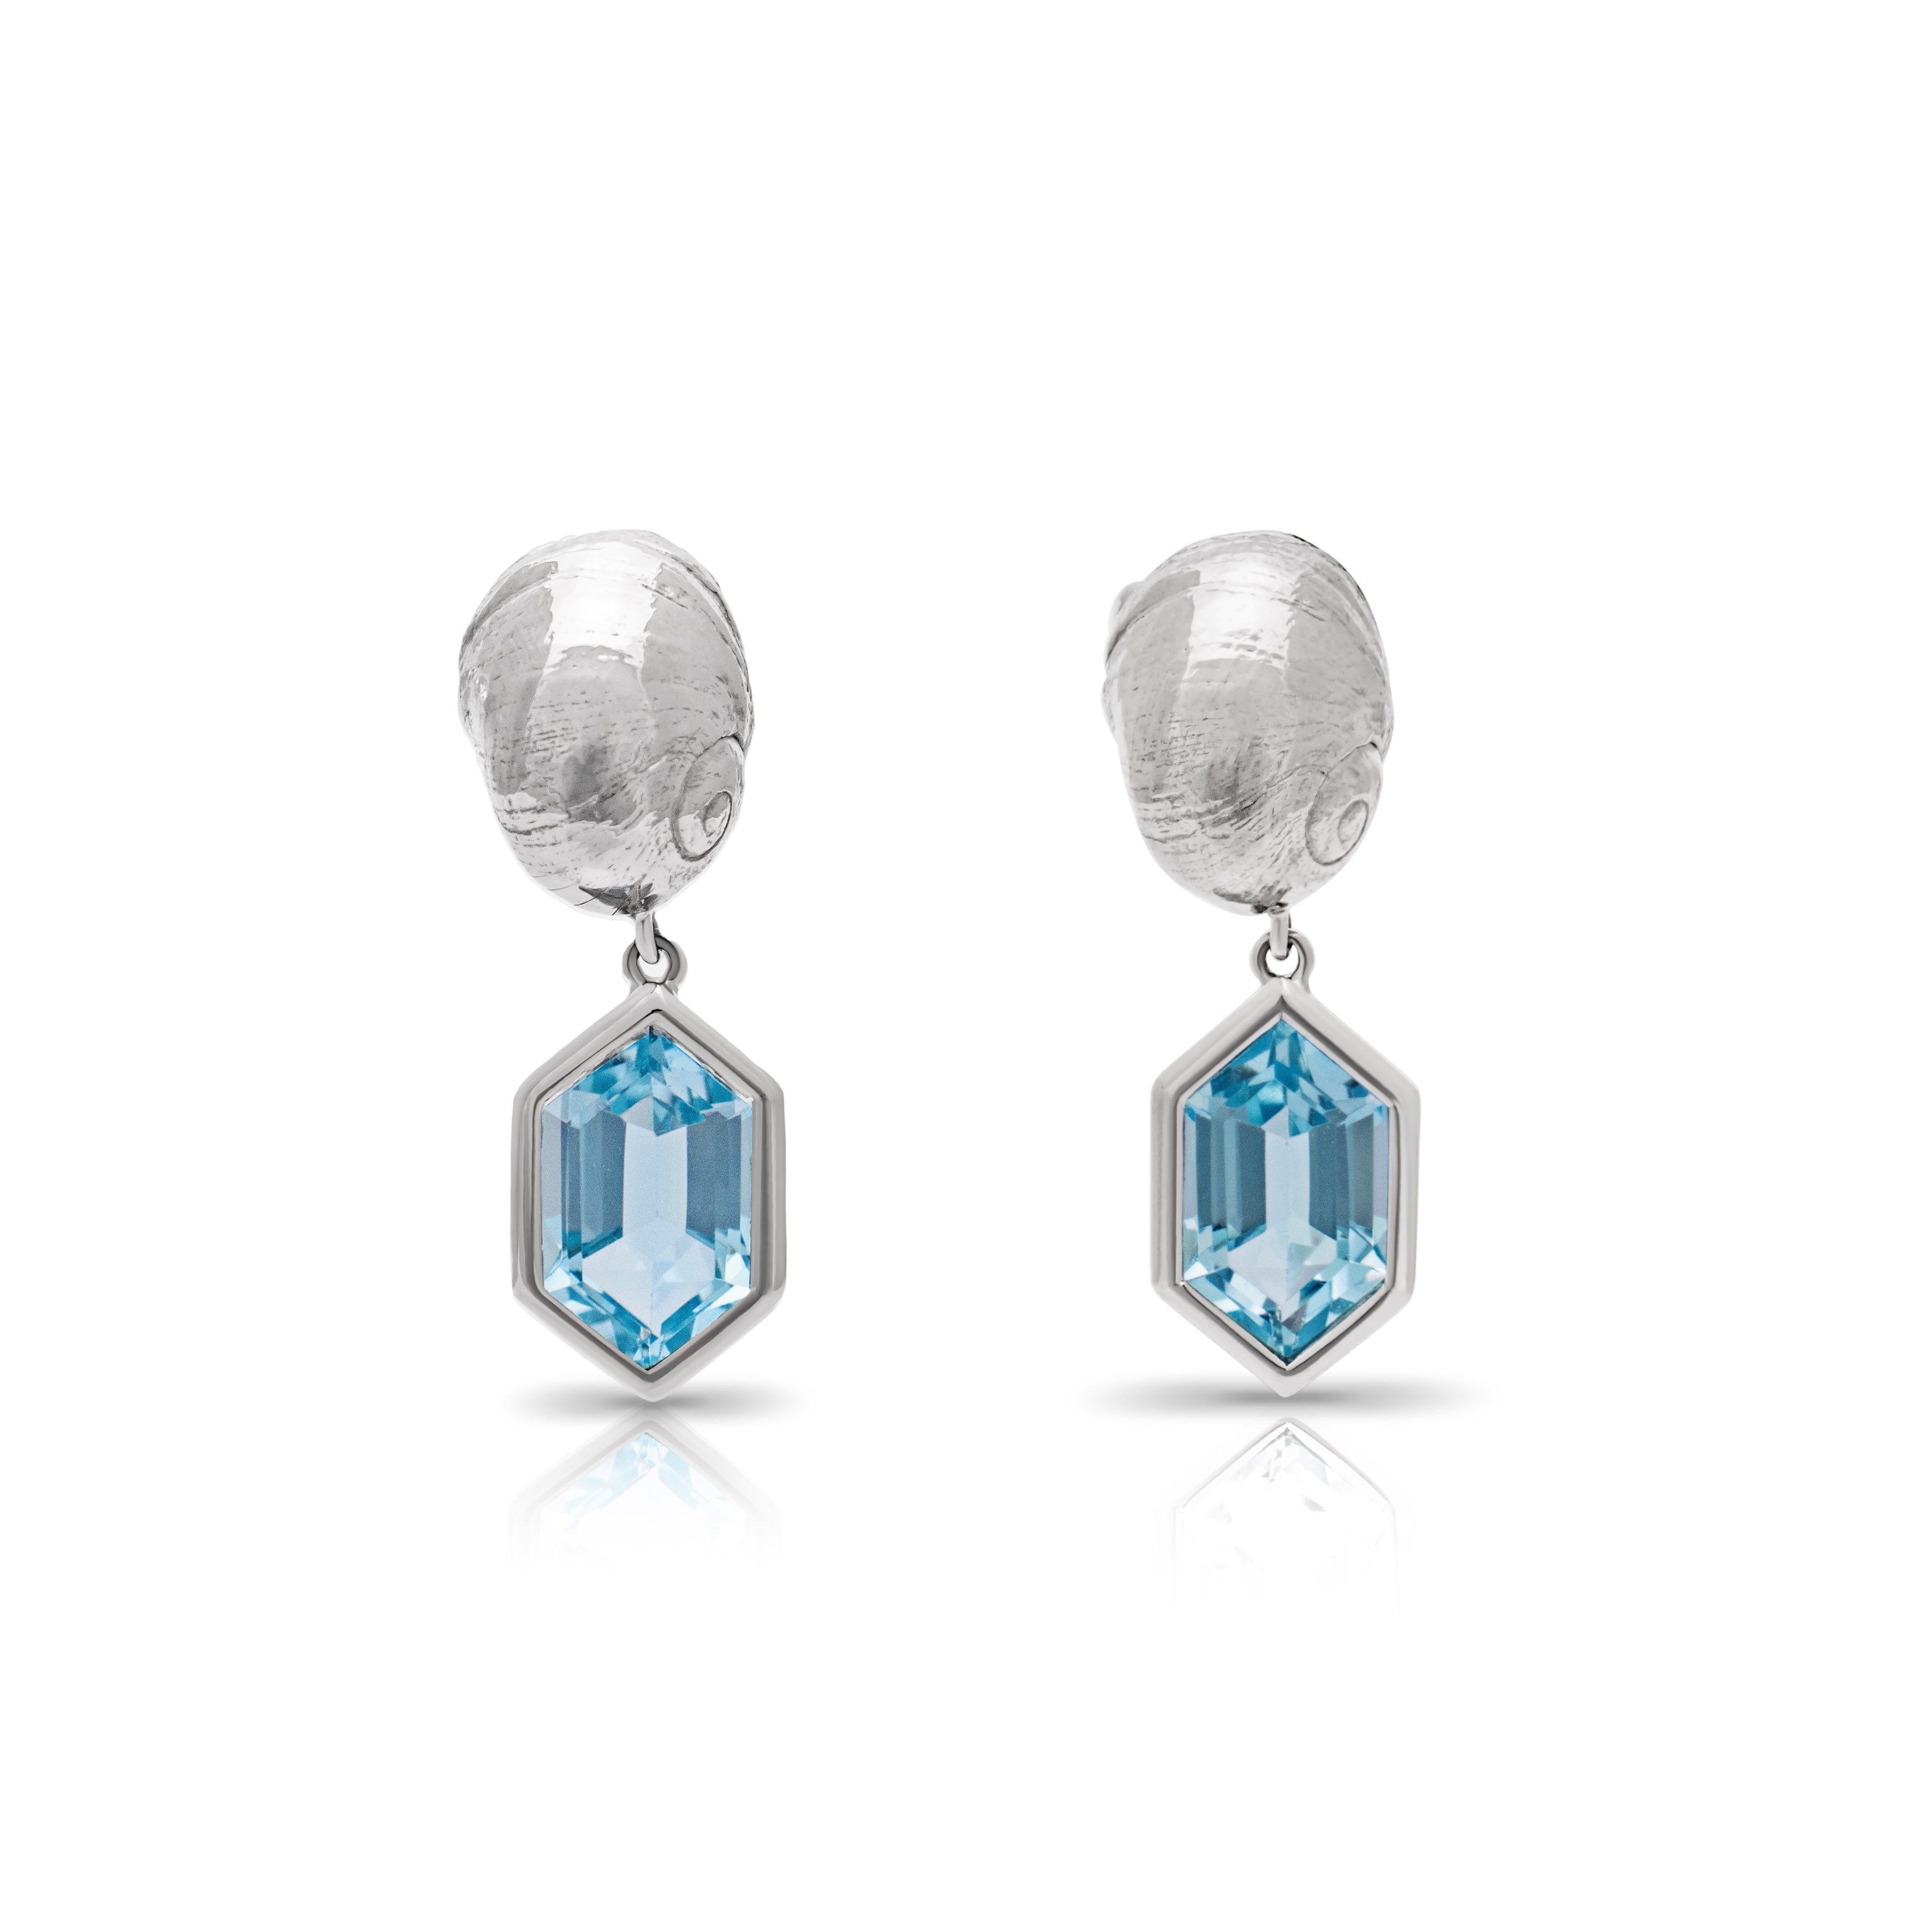 Bespoke 'Those Happy Places' collection Constantine Bay Shell Earrings in Platinum with a Hexagonal Topaz Drop. Serena Ansell bespoke jewellery design. Bespoke jewellery designer London. Bespoke earrings London. 